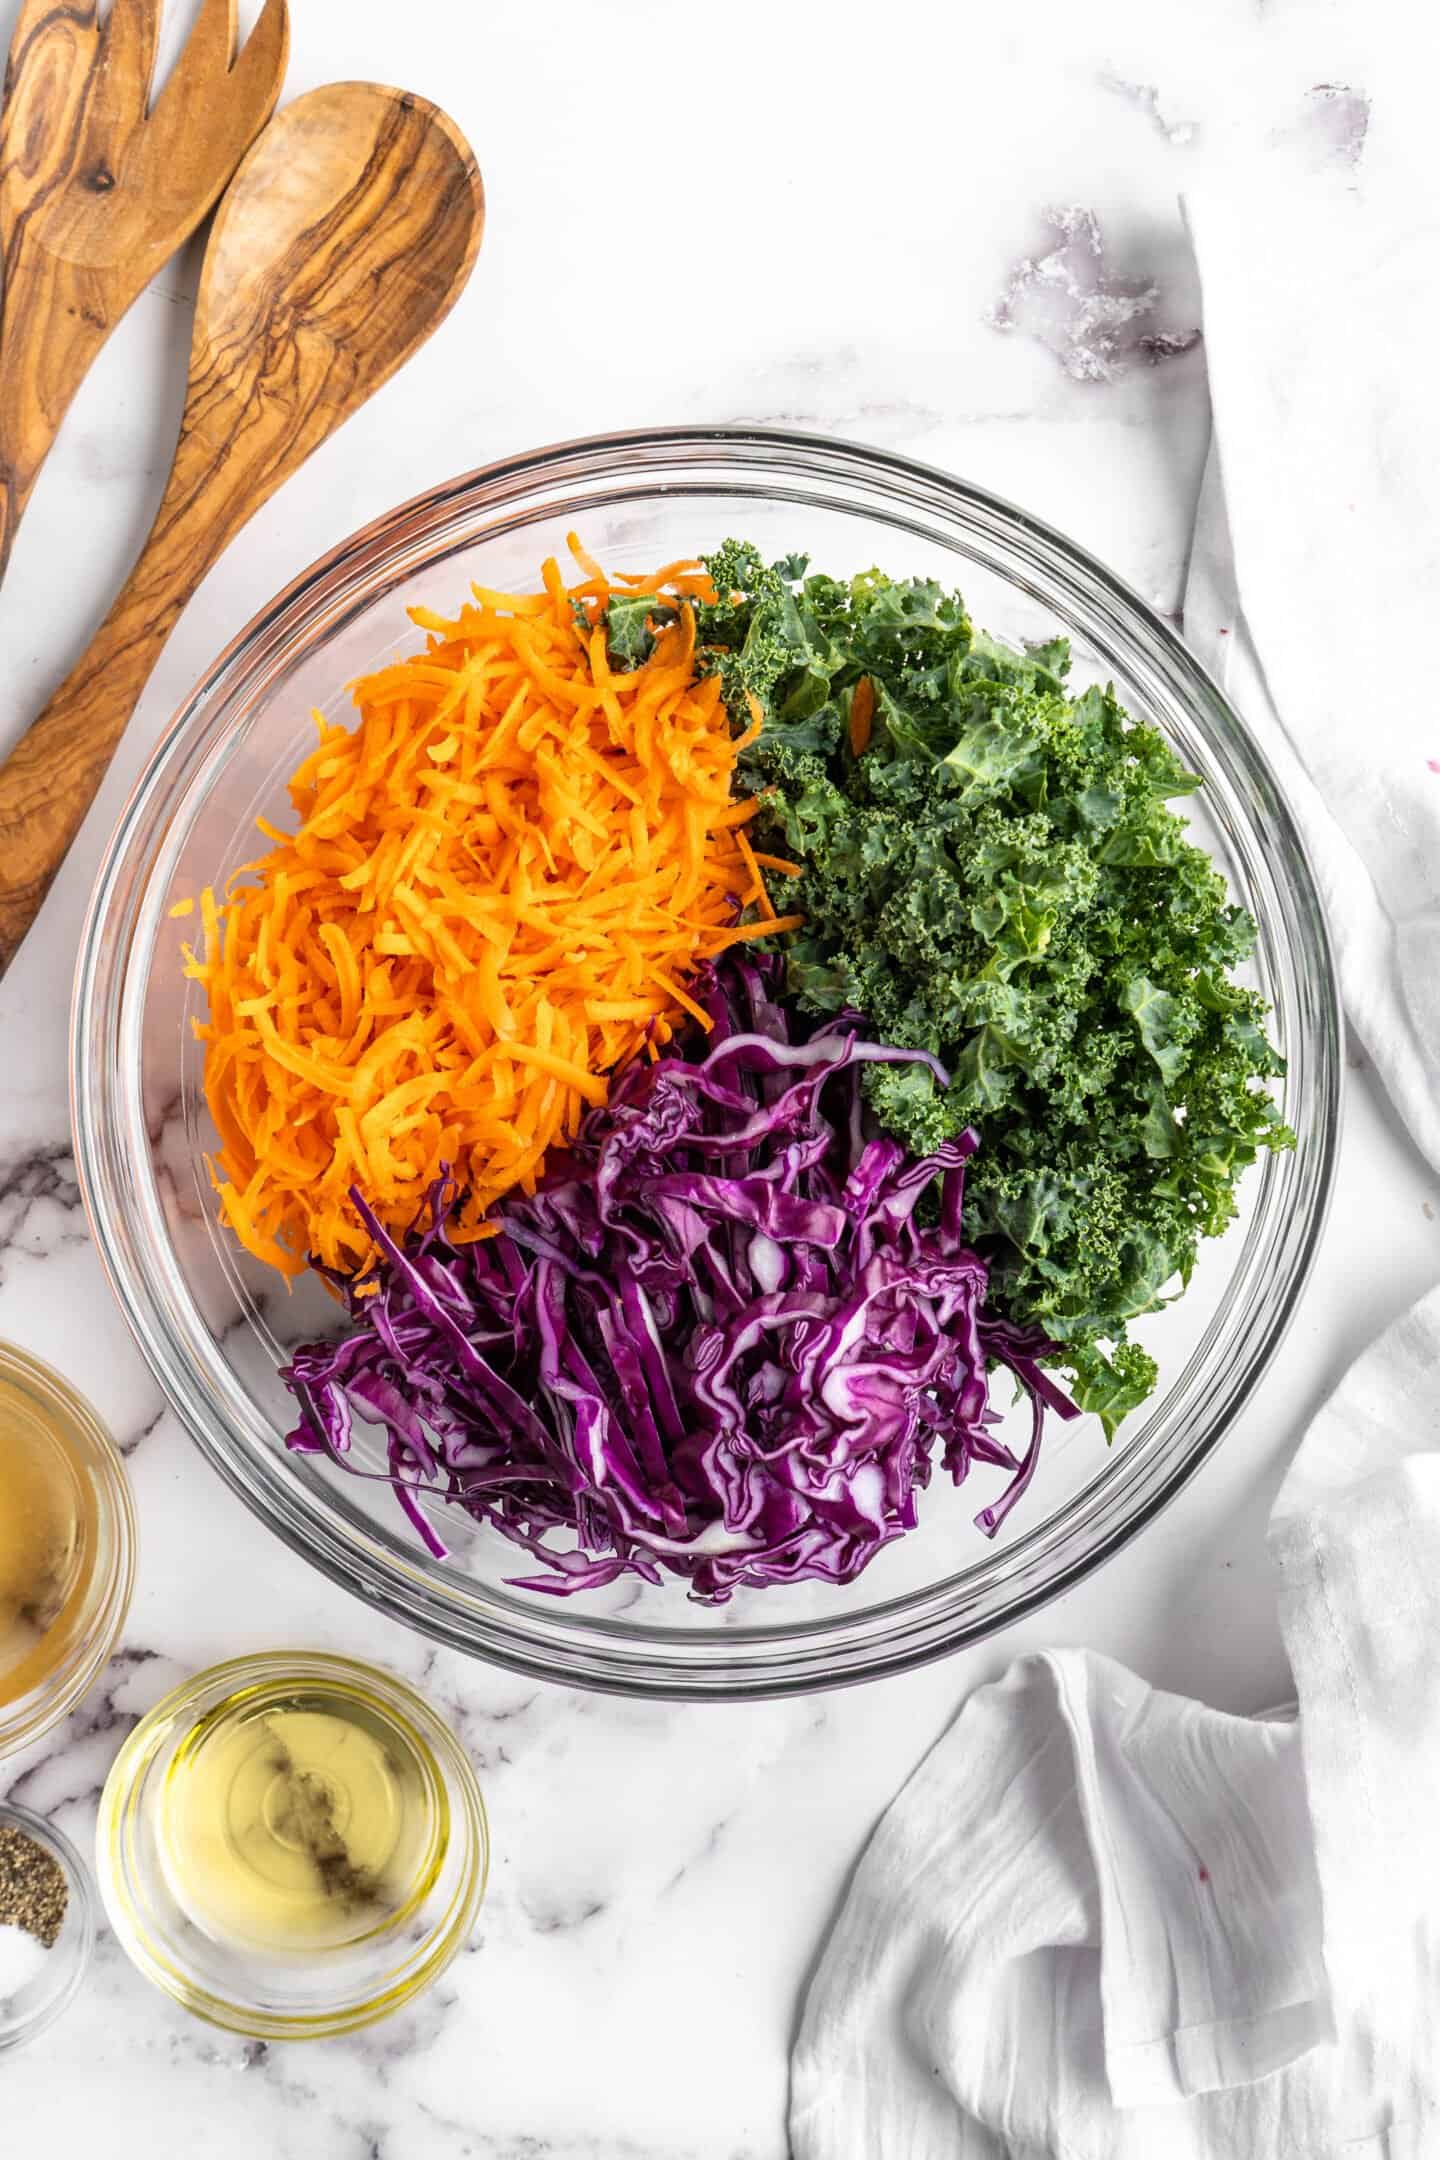 Overhead view of coleslaw ingredients in large glass mixing bowl